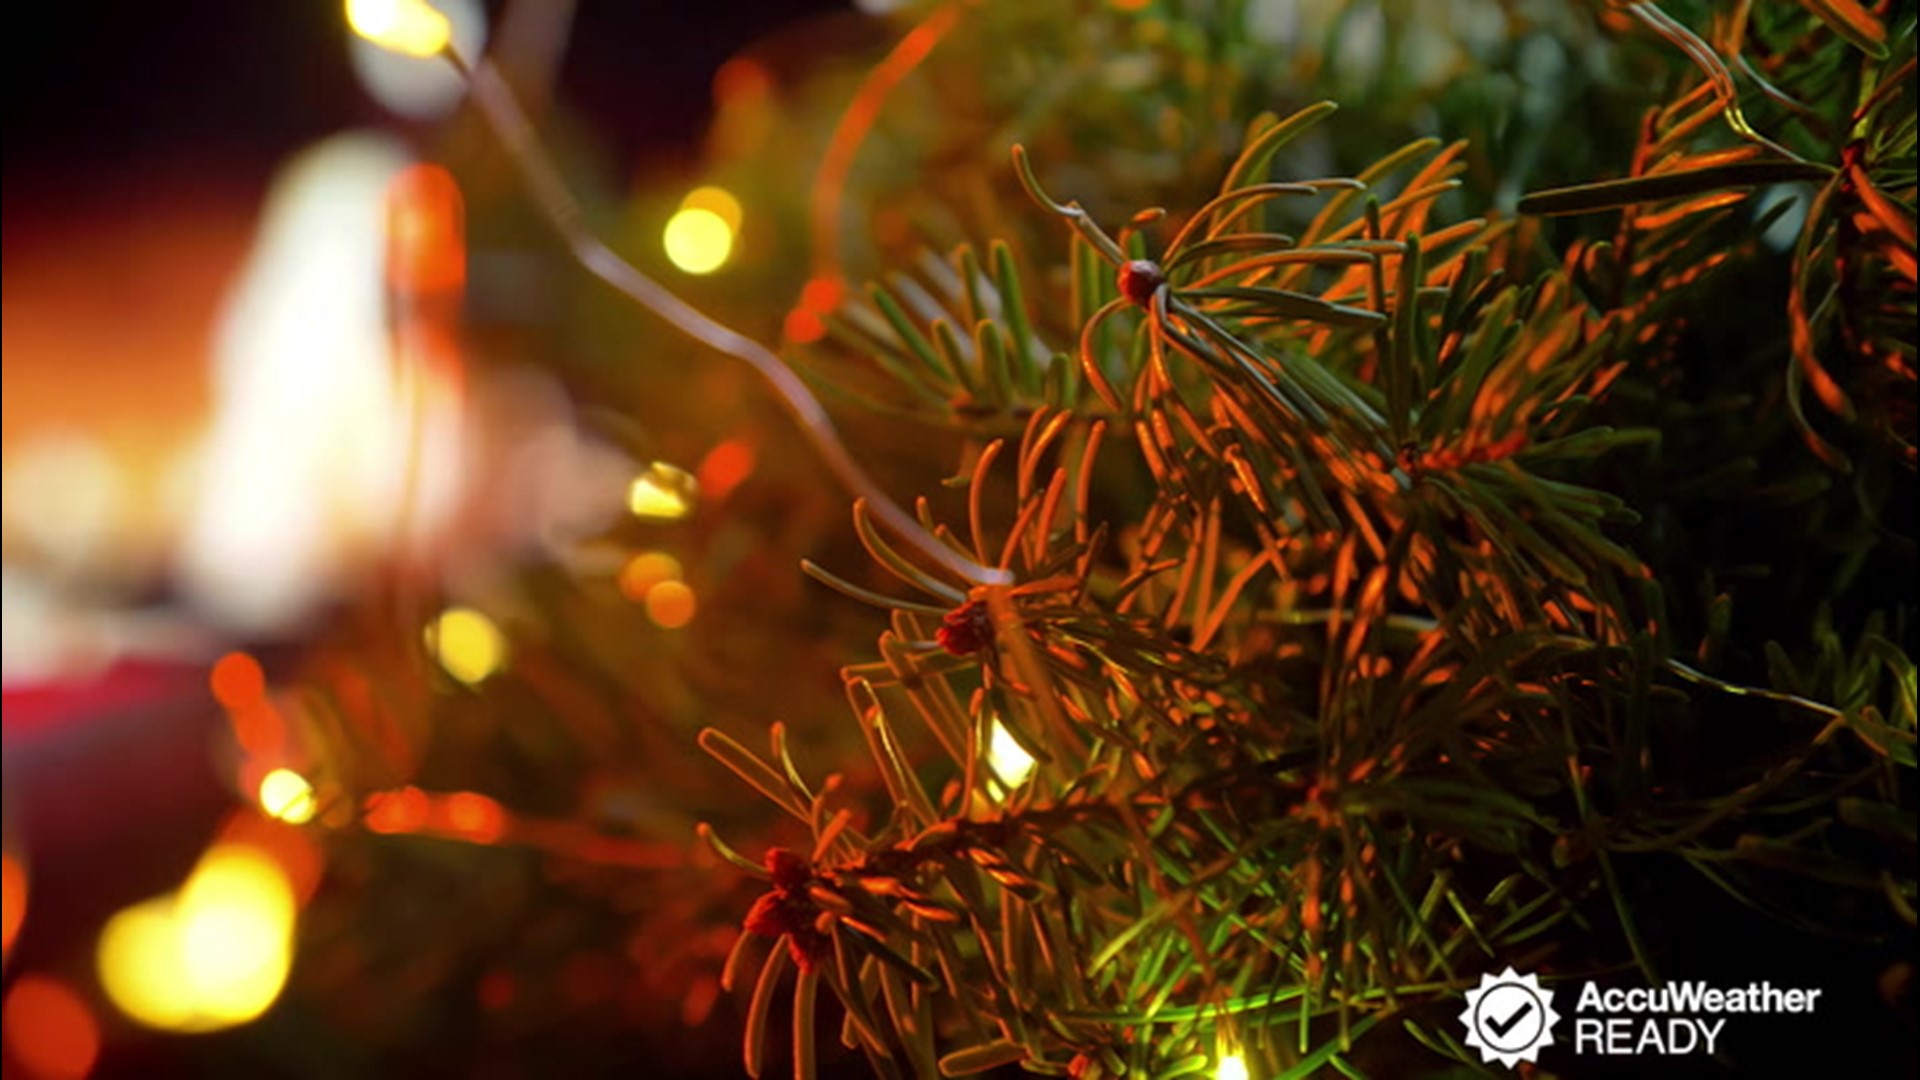 Christmas trees are a holiday staple in many homes, but they can pose a fire hazard if not handled properly. Follow these tips to keep your holidays from going up in flames.